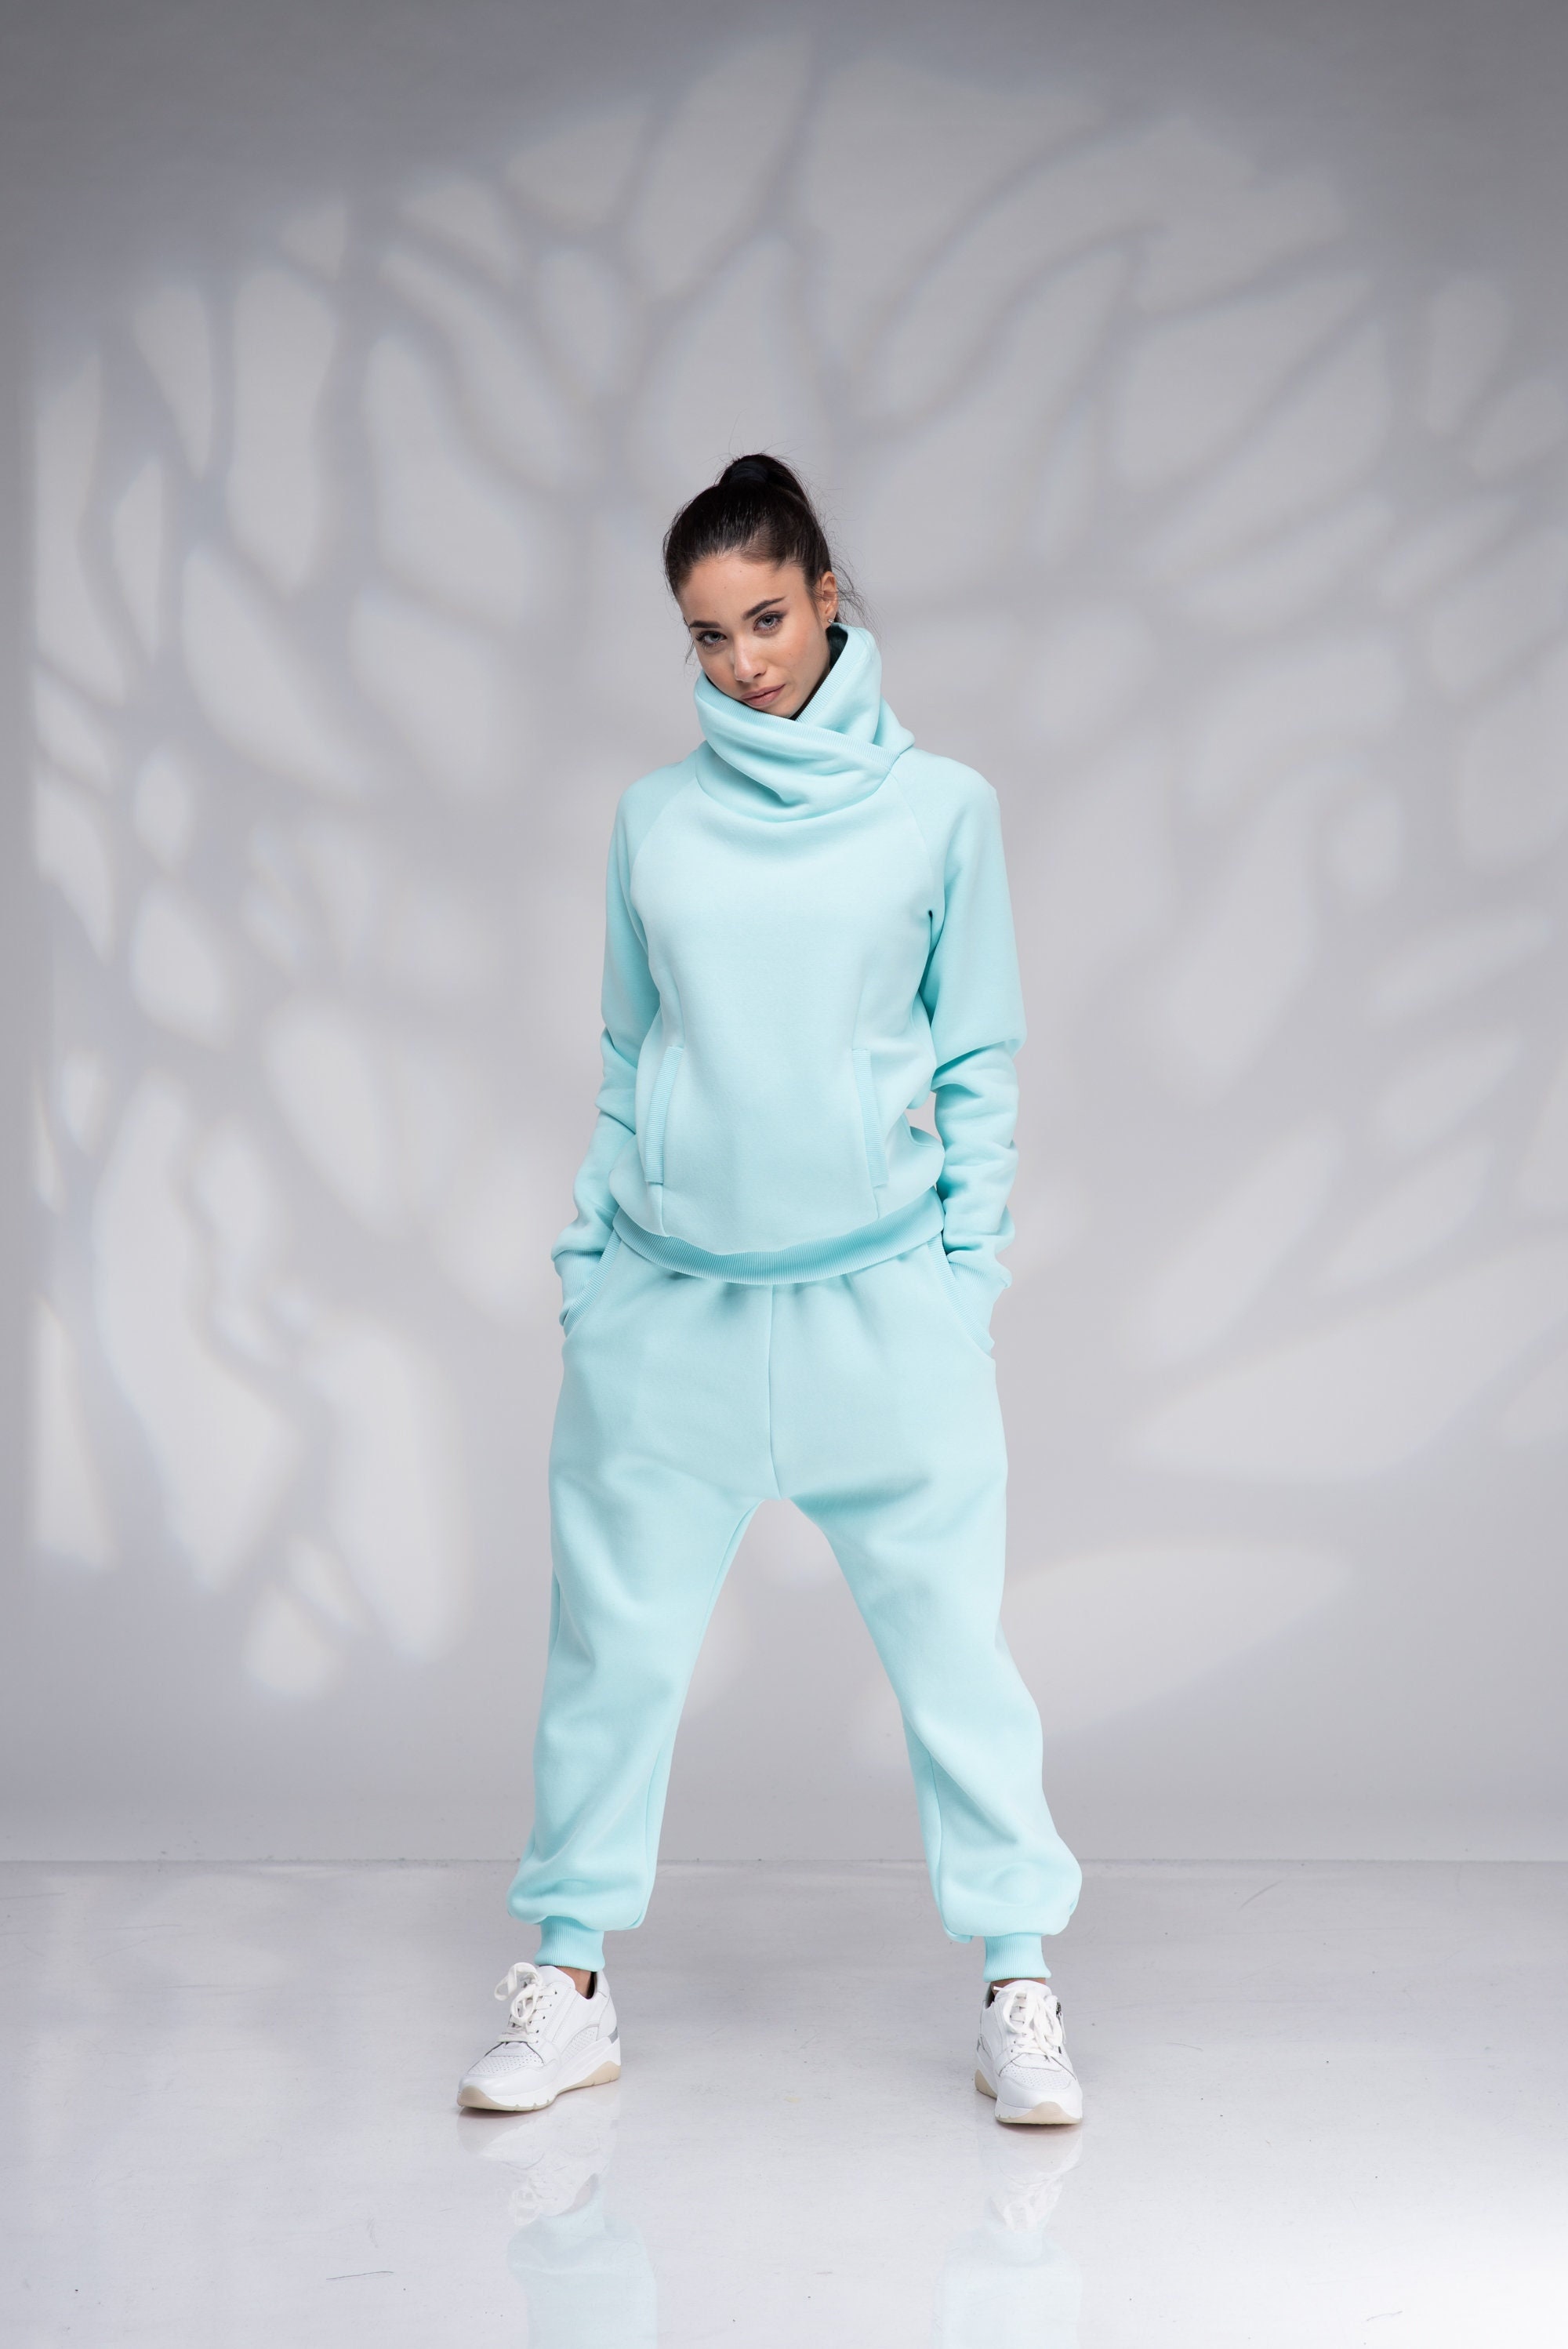 Two Piece Outfits For Women Lounge Pants Sets Womens Jogging Suits Tracksuit Matching Clothing Sweatsuit 